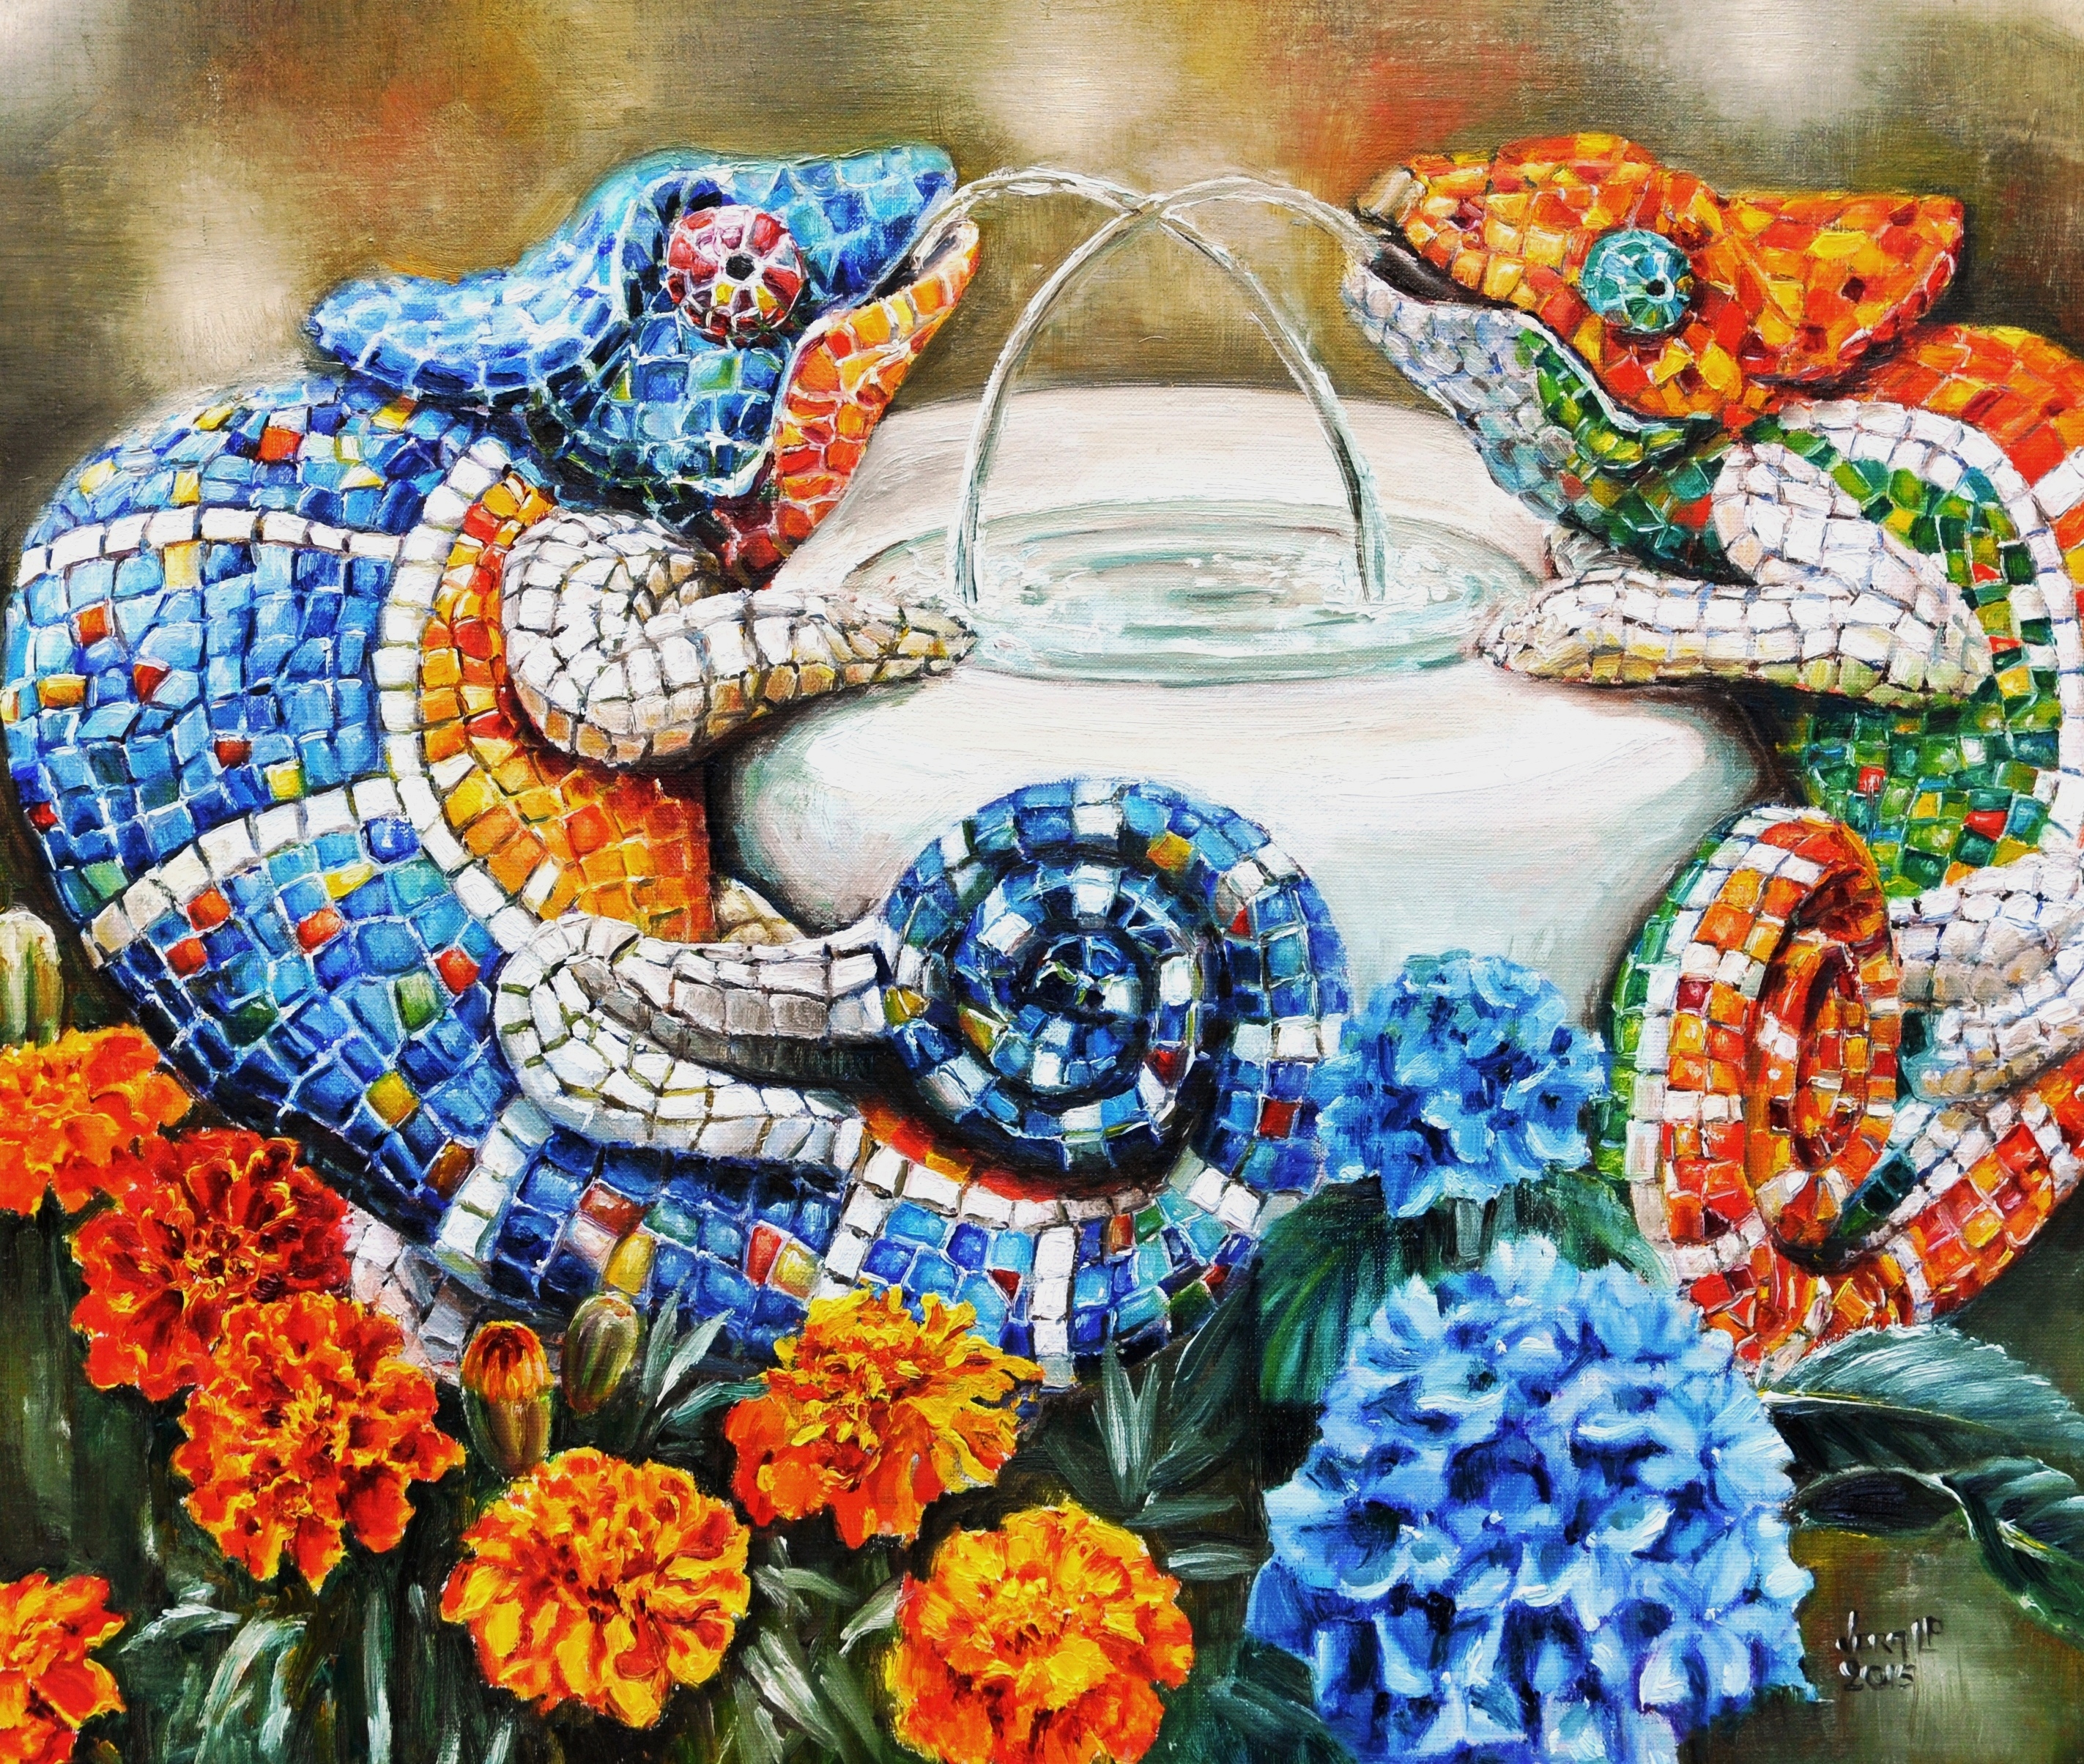 Chameleon mosaic fountain | Oil paint on linen | Year: 2016 | Dimensions: 60x70cm